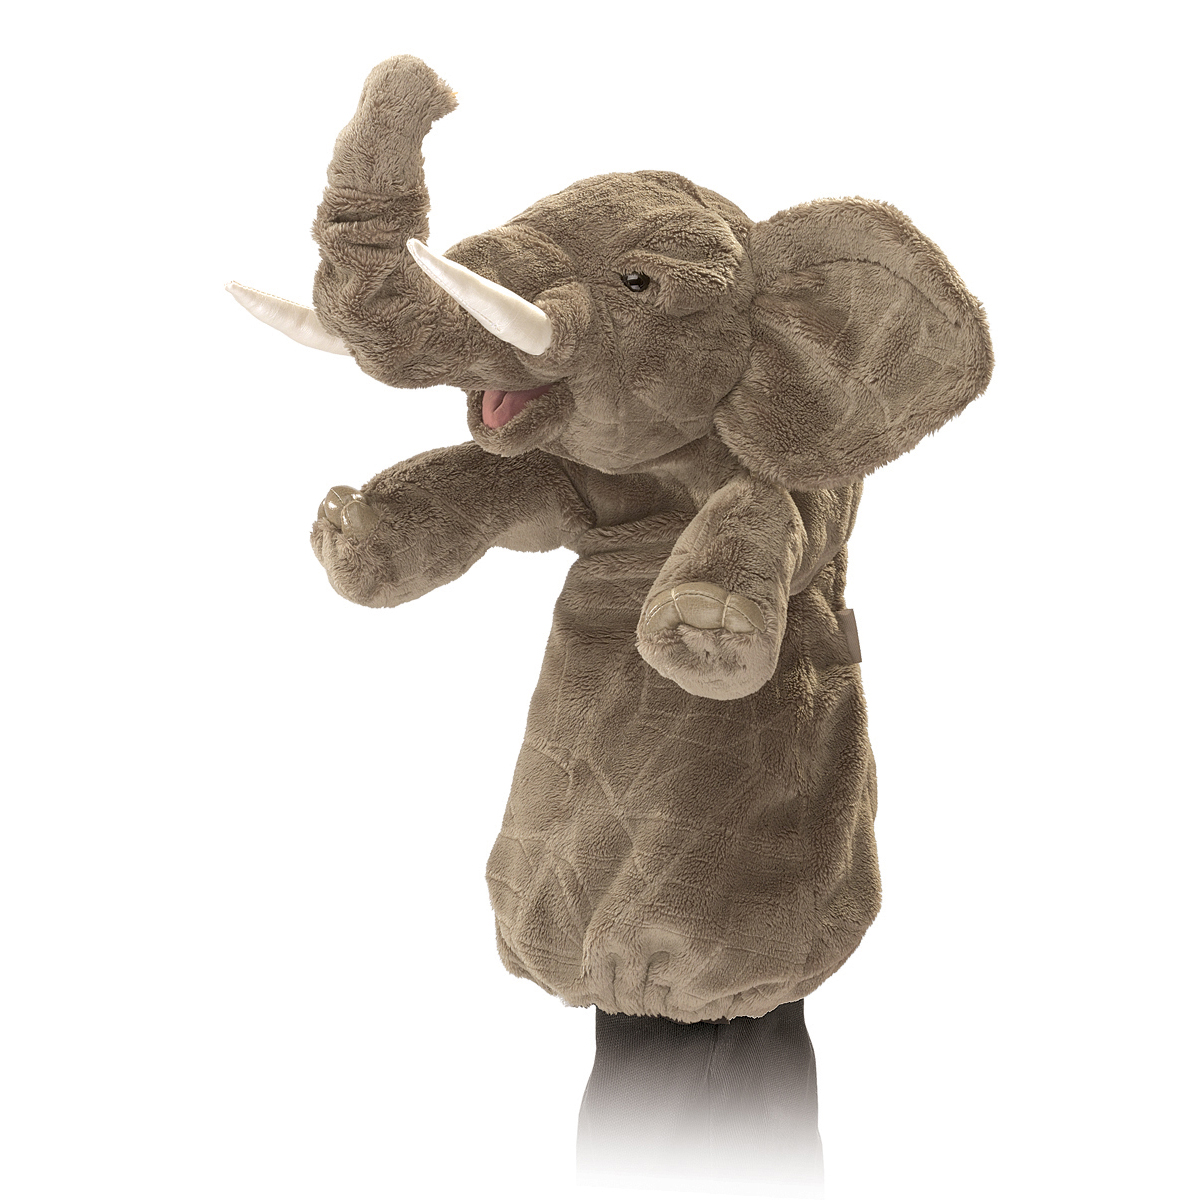 Folkmanis hand puppet elephant (stage puppet)